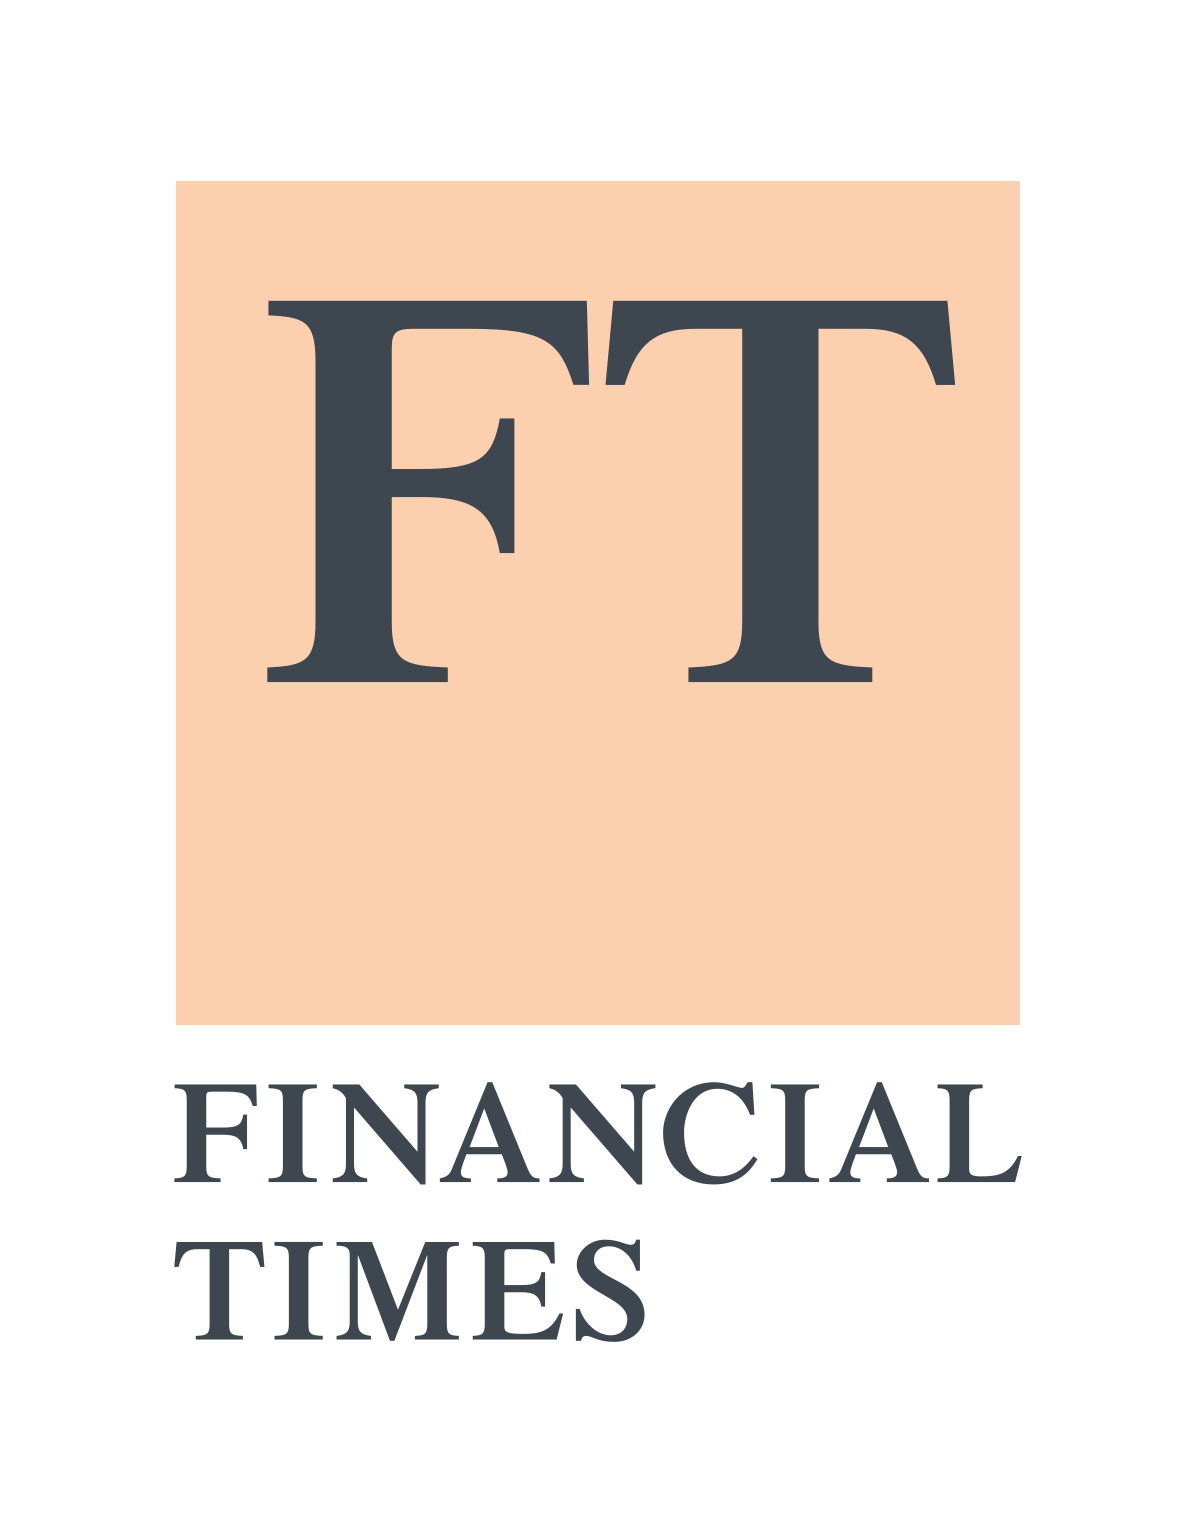 Financial Times (7 July 2021)